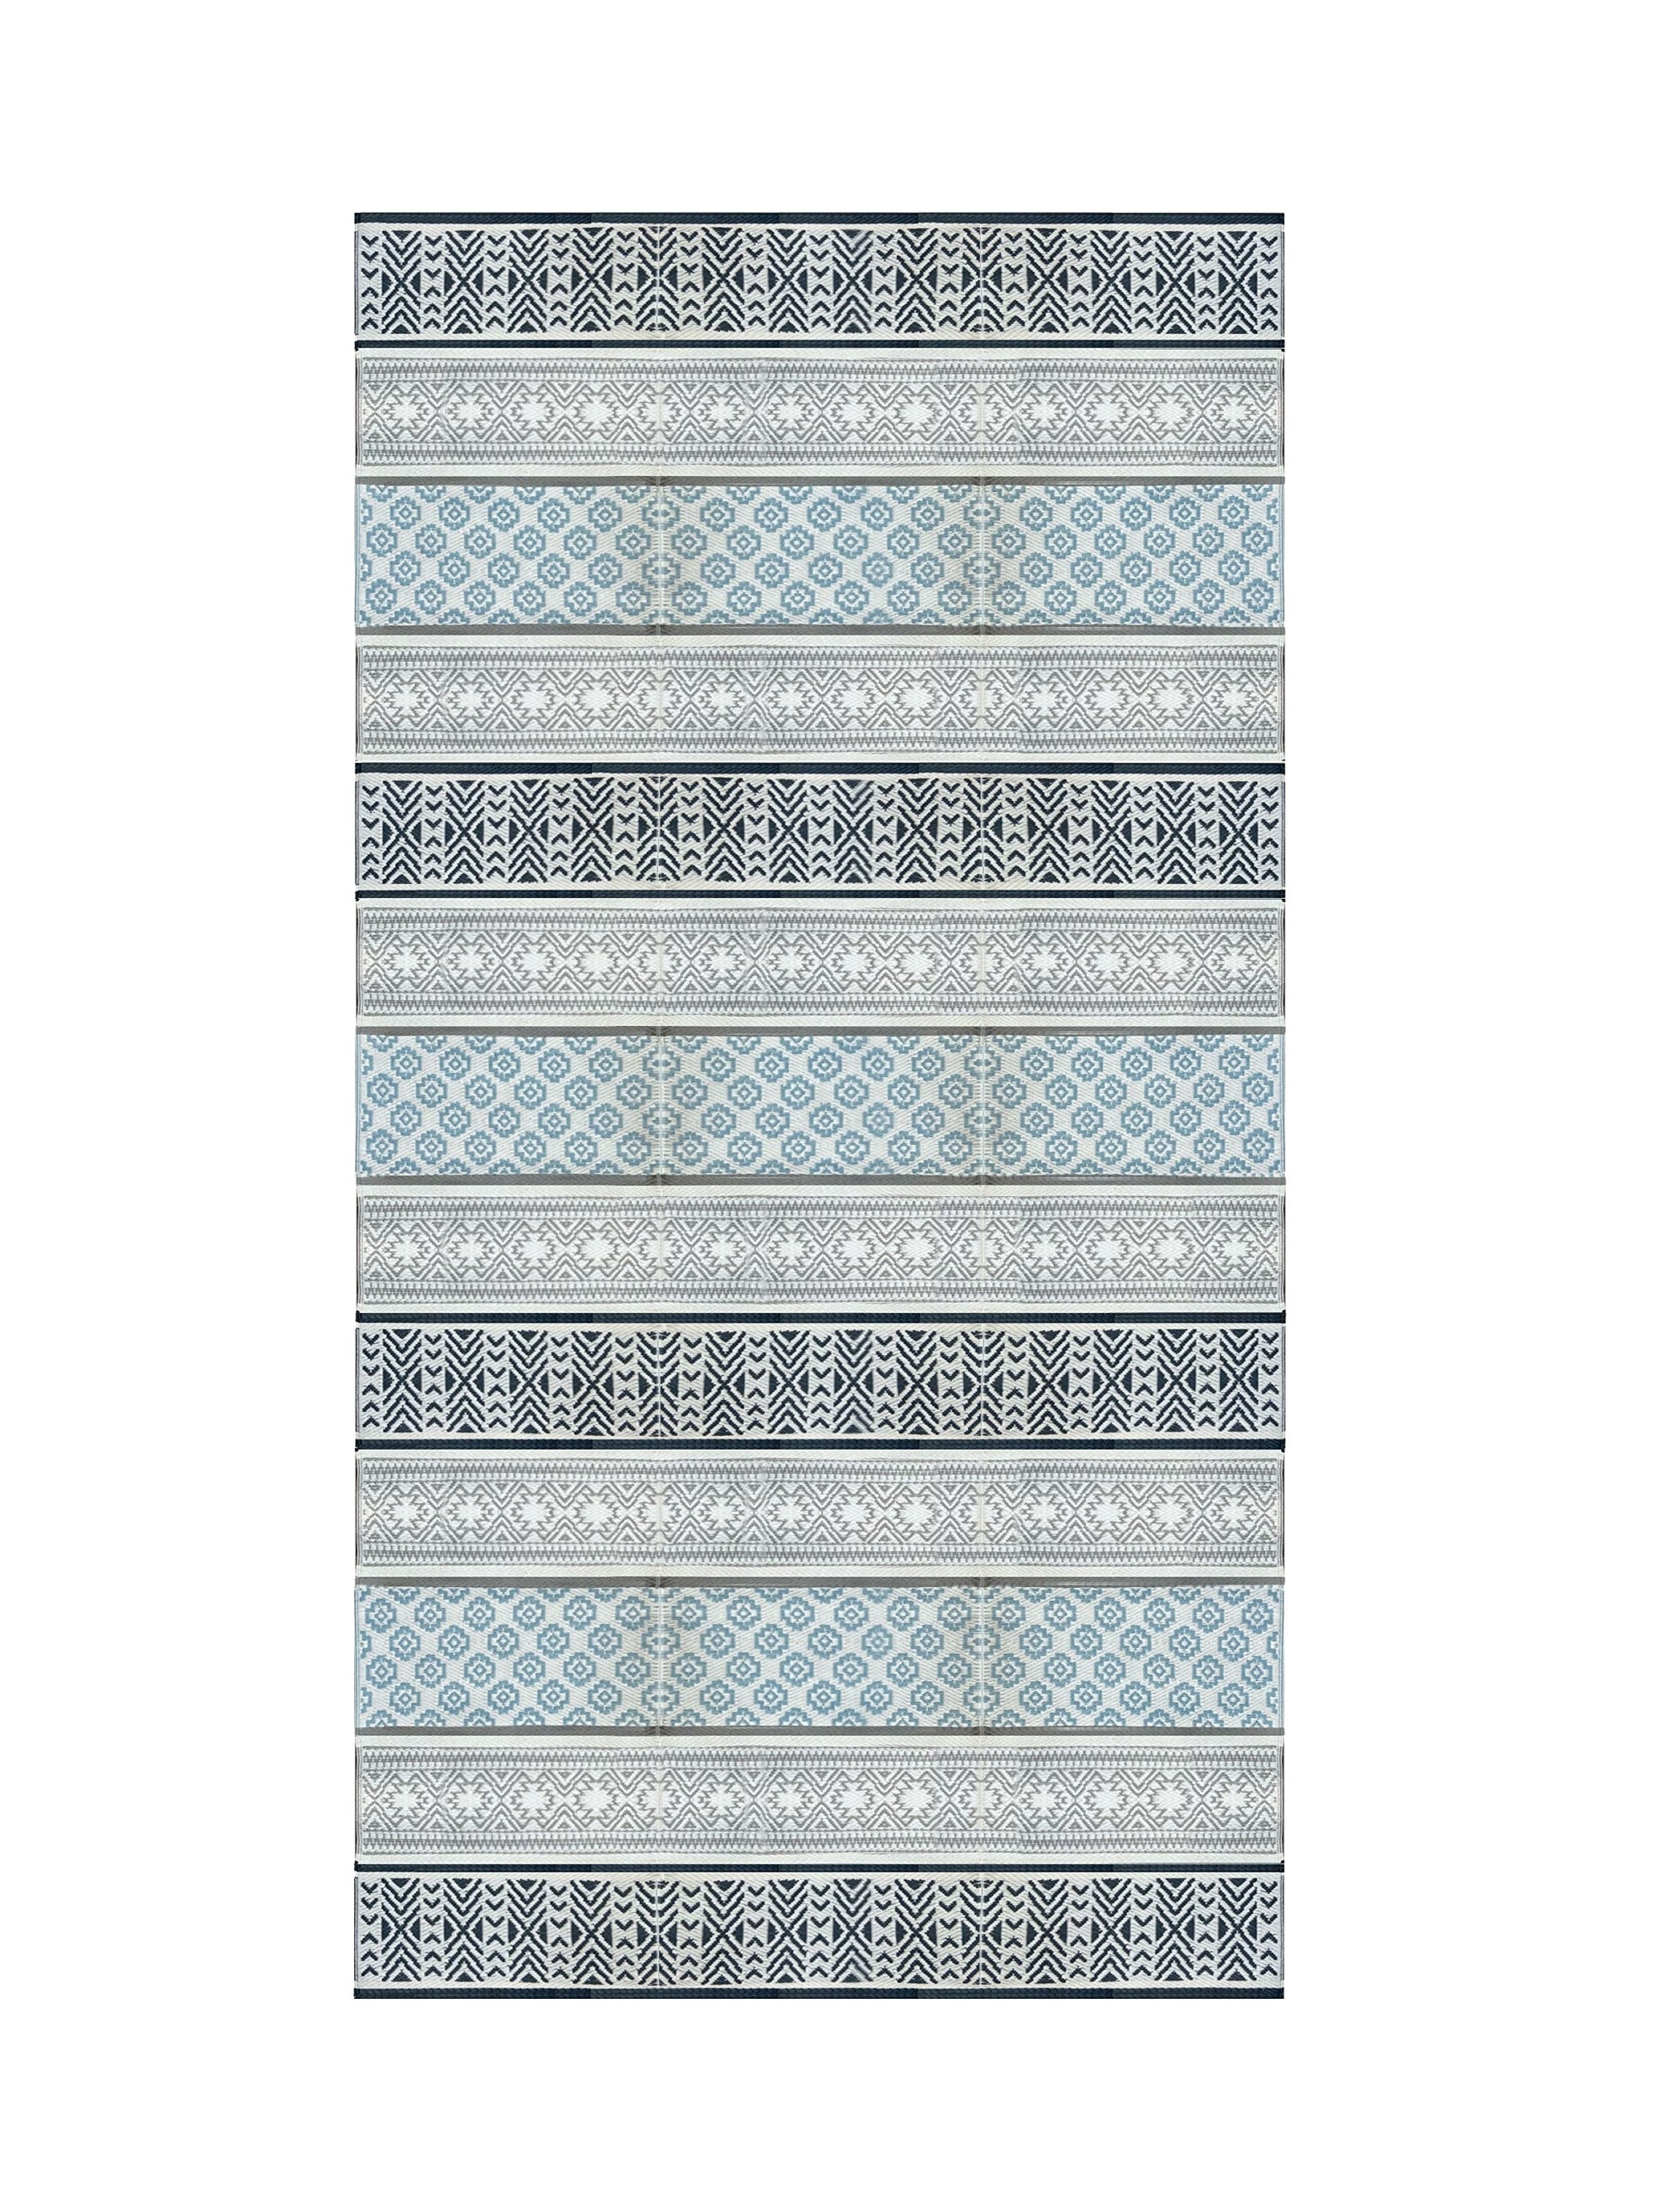 BalajeesUSA Outdoor Rugs Plastic Straw Patio rugs-6 by 9 Feet. Grey,Teal Reversible Mats Waterproof Camper Mats Patio Rugs Clearance. 7018, Size: 6' x